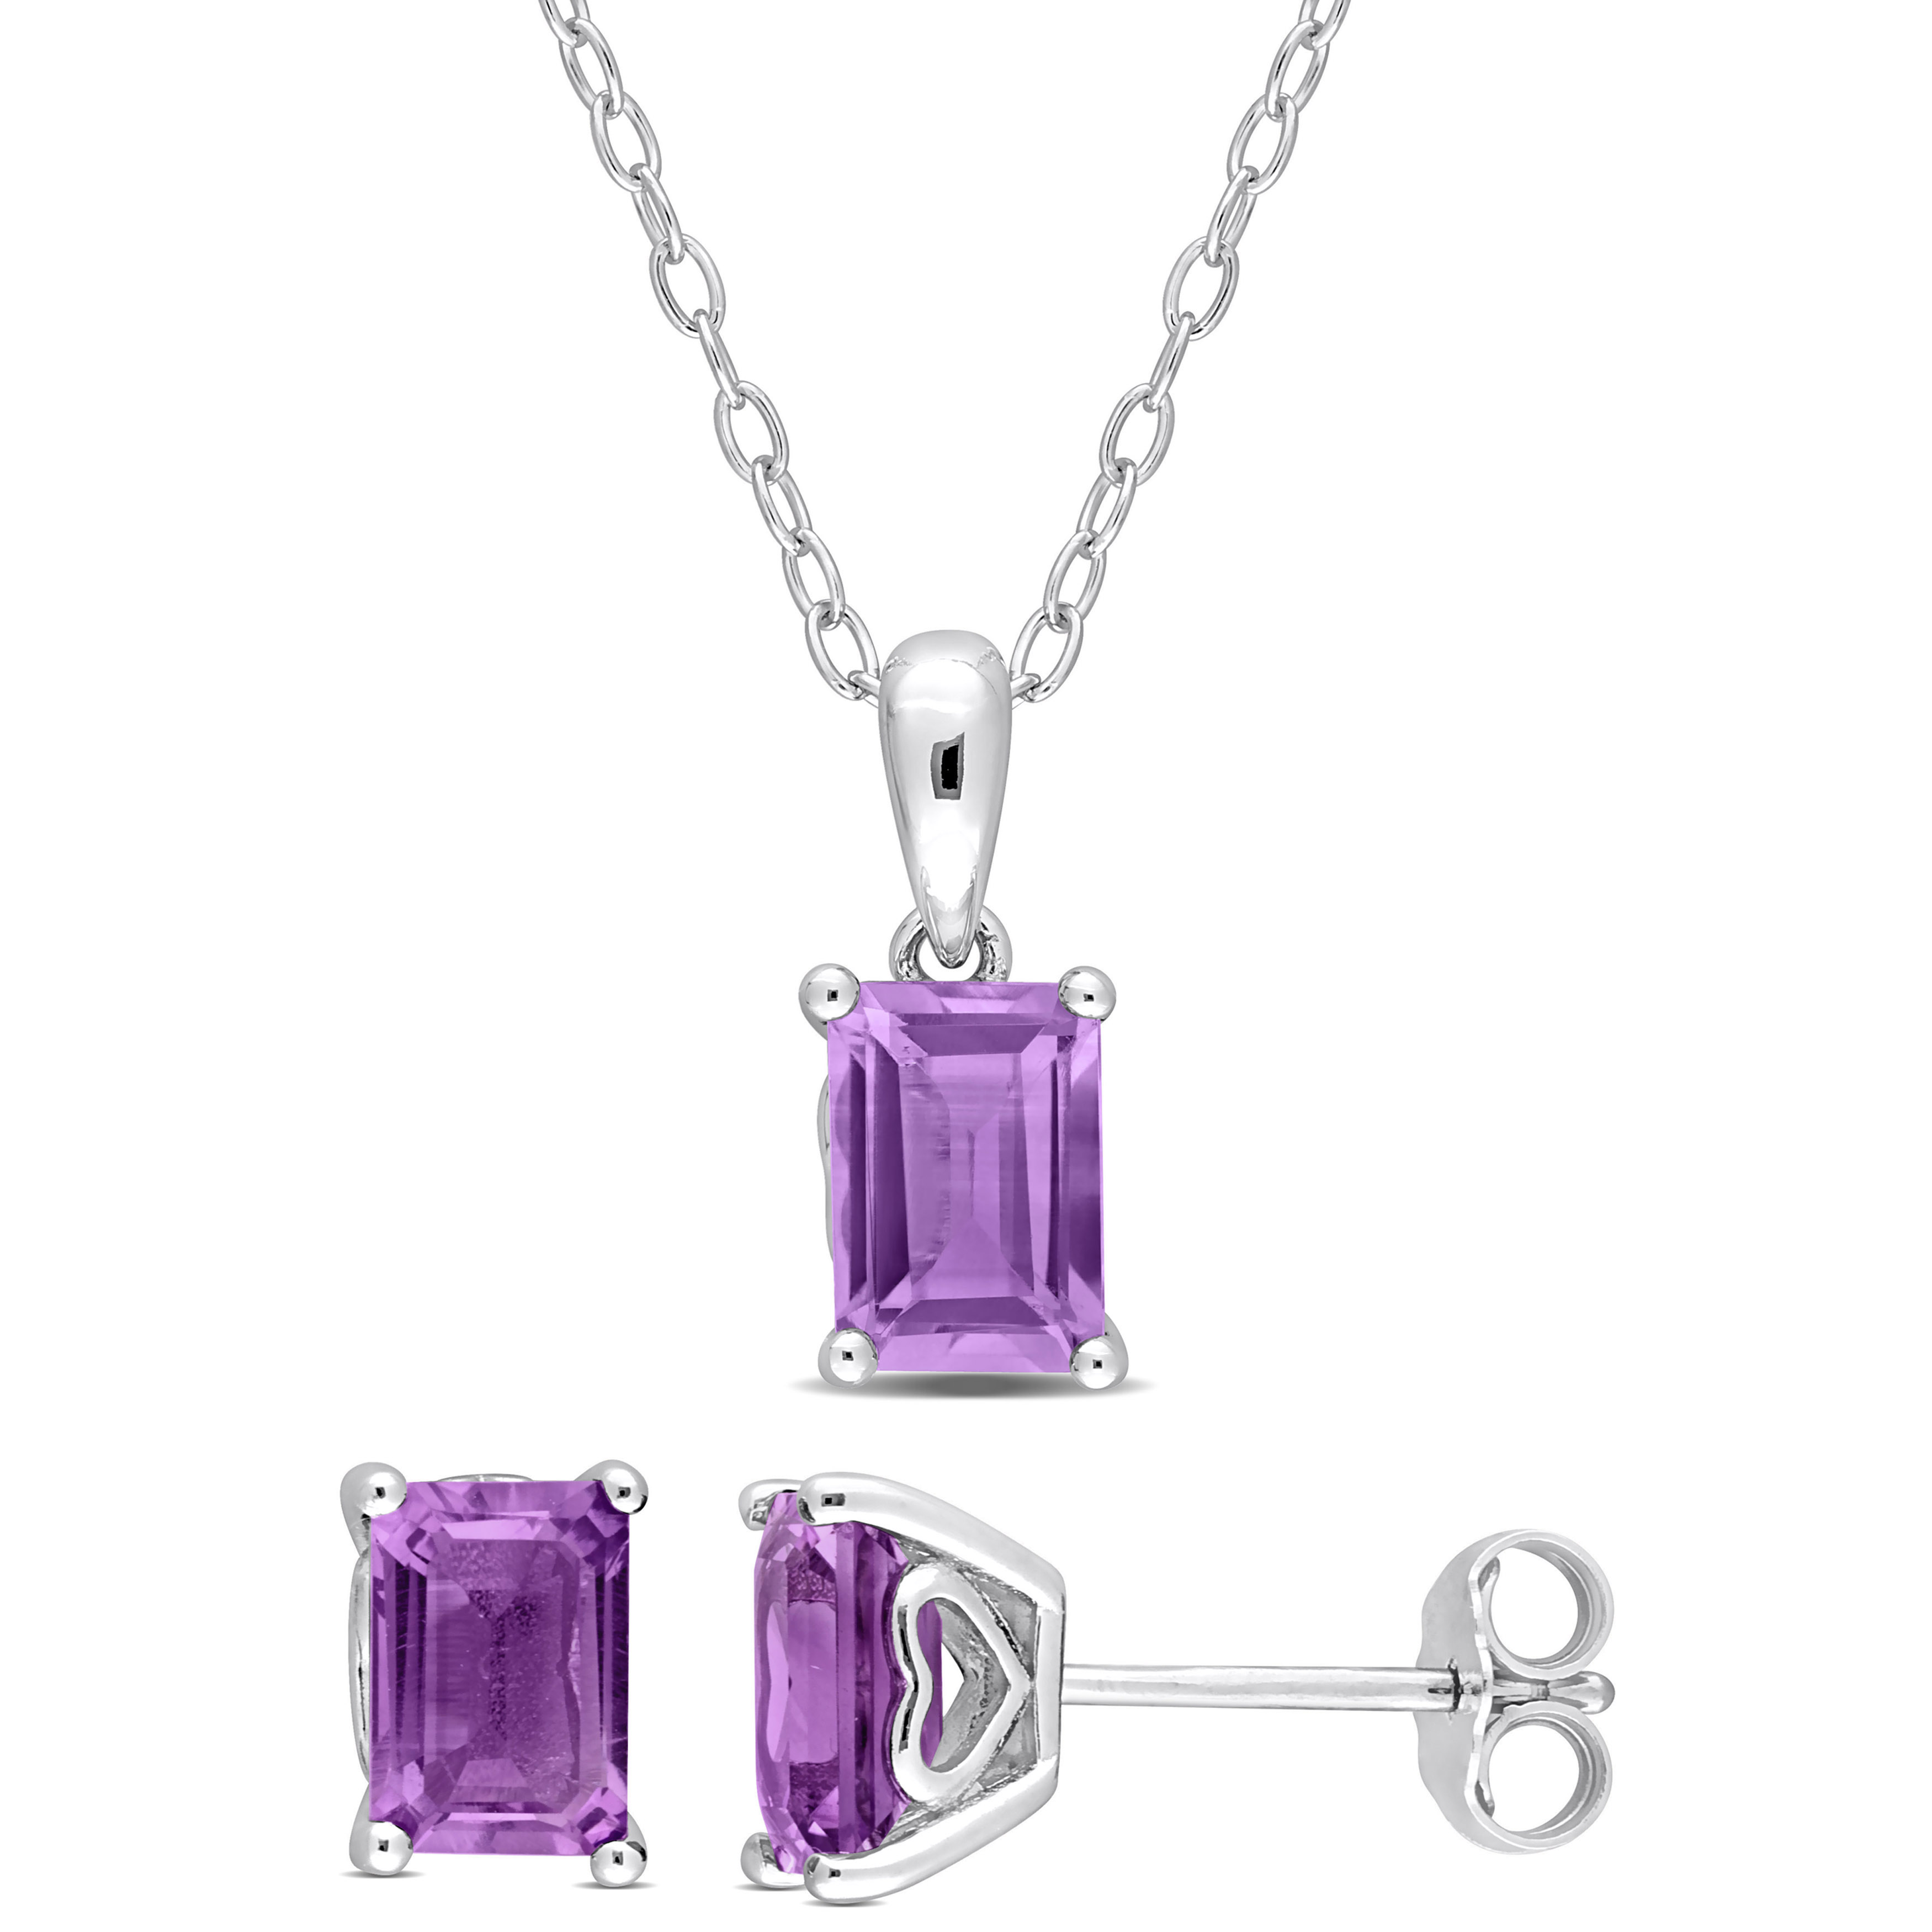 3 CT TGW Emerald-Cut and Octagon Amethyst 2-Piece Set of Pendant with Chain and Earrings in Sterling Silver